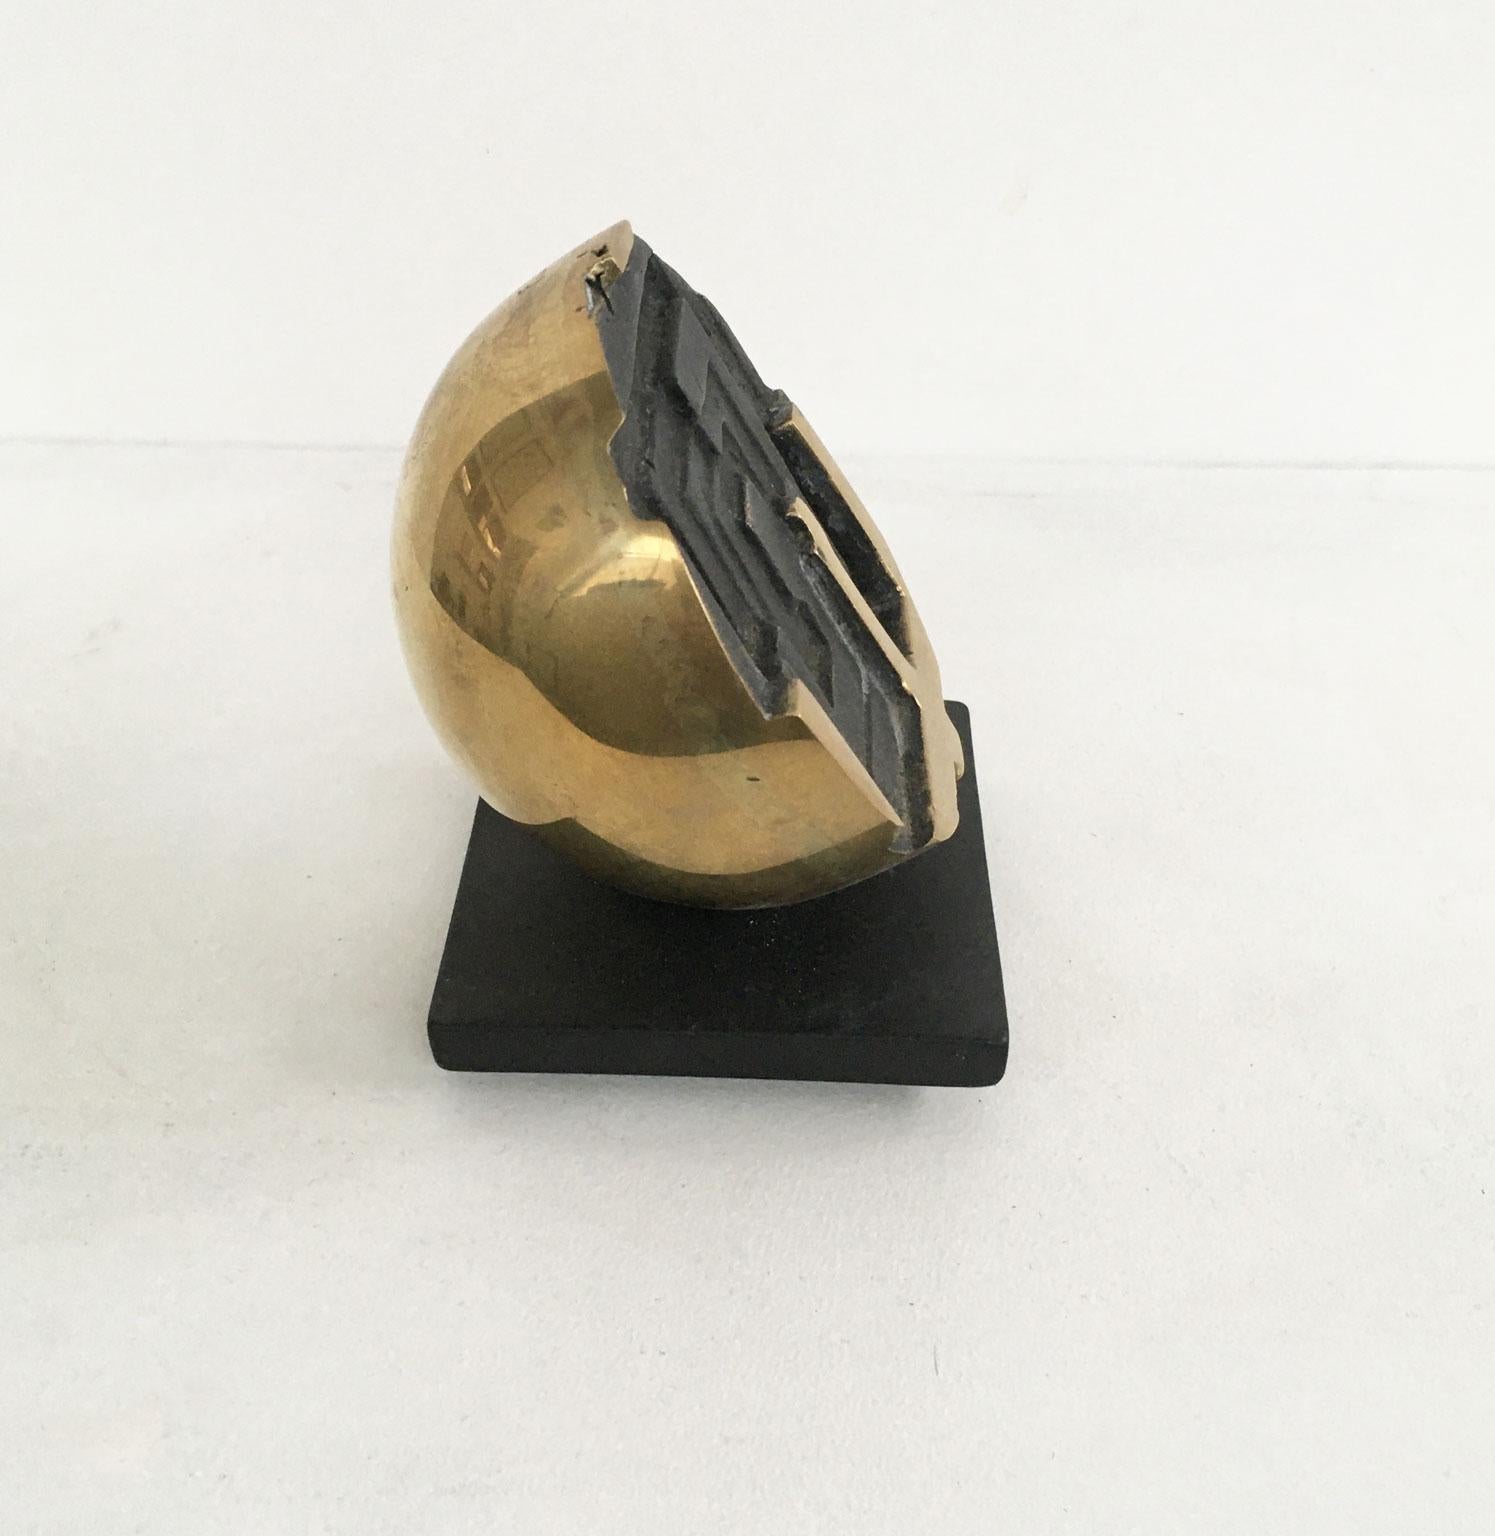 1978 Italy Bronze Abstract Sculpture by Fanna Roncoroni Labirinto Labyrinth In Good Condition For Sale In Brescia, IT